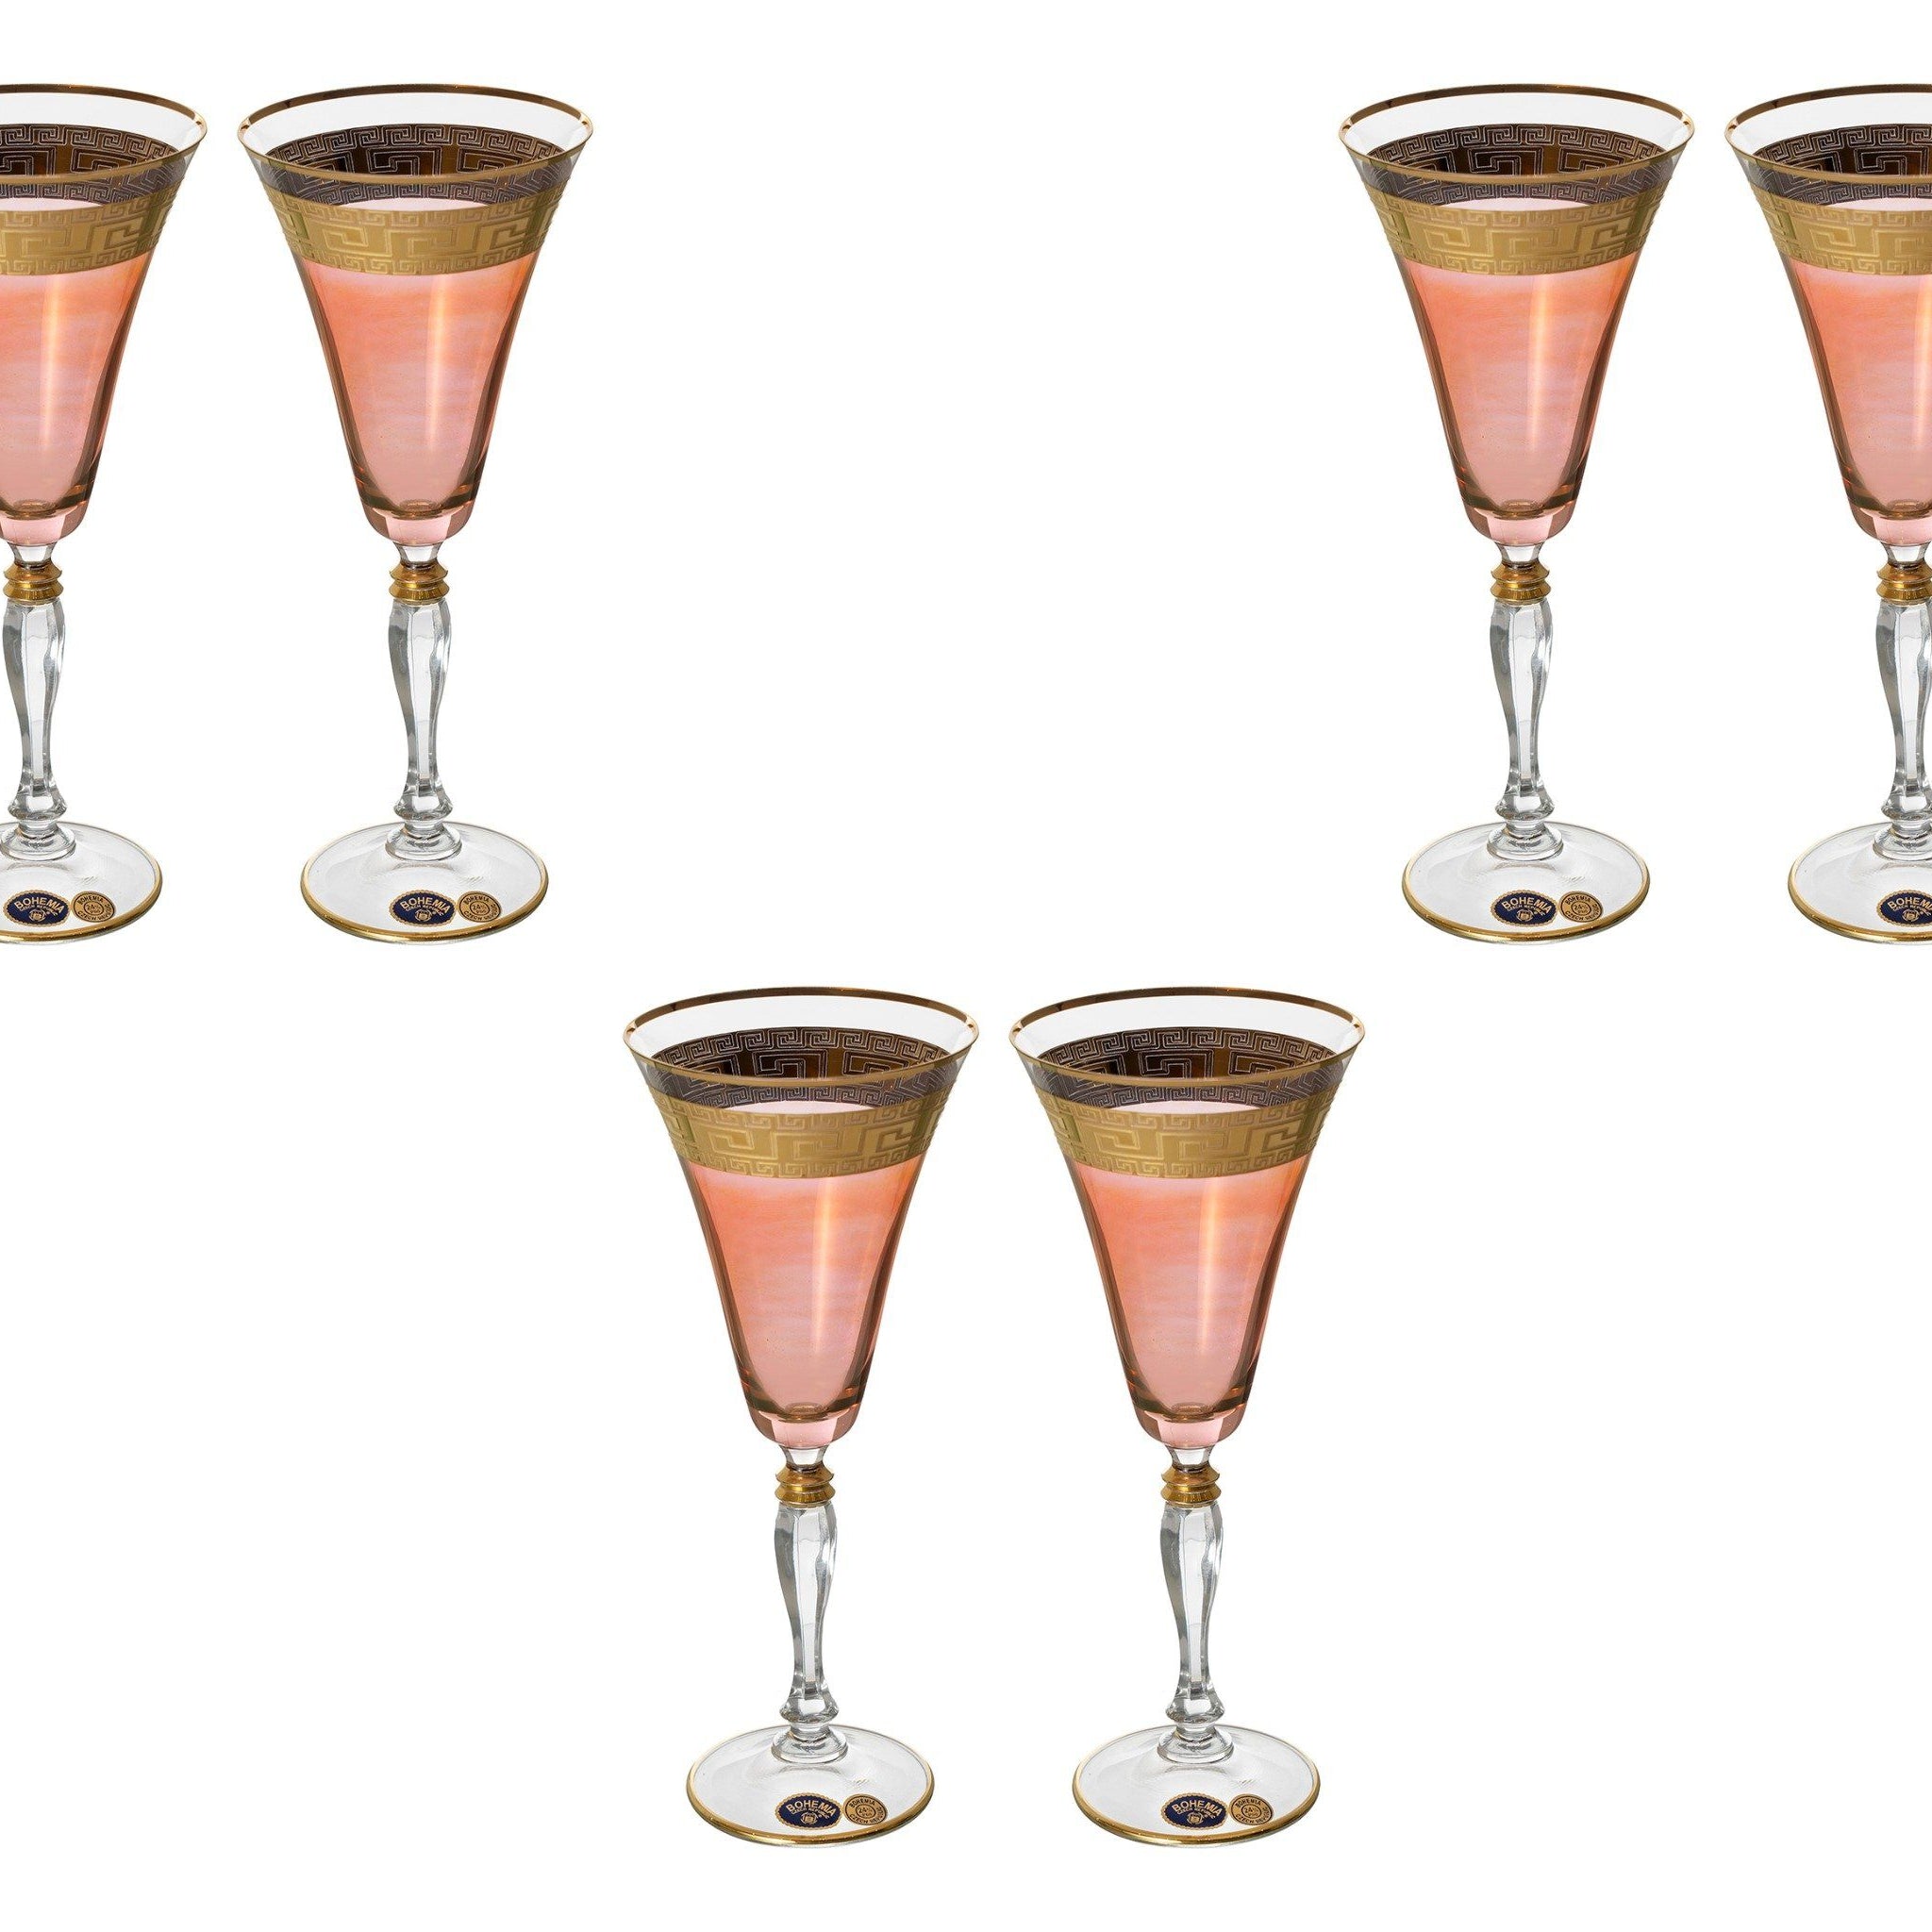 Bohemia Crystal - Goblet Glass Set 6 Pieces - Red & Gold - 230ml - 3900010047